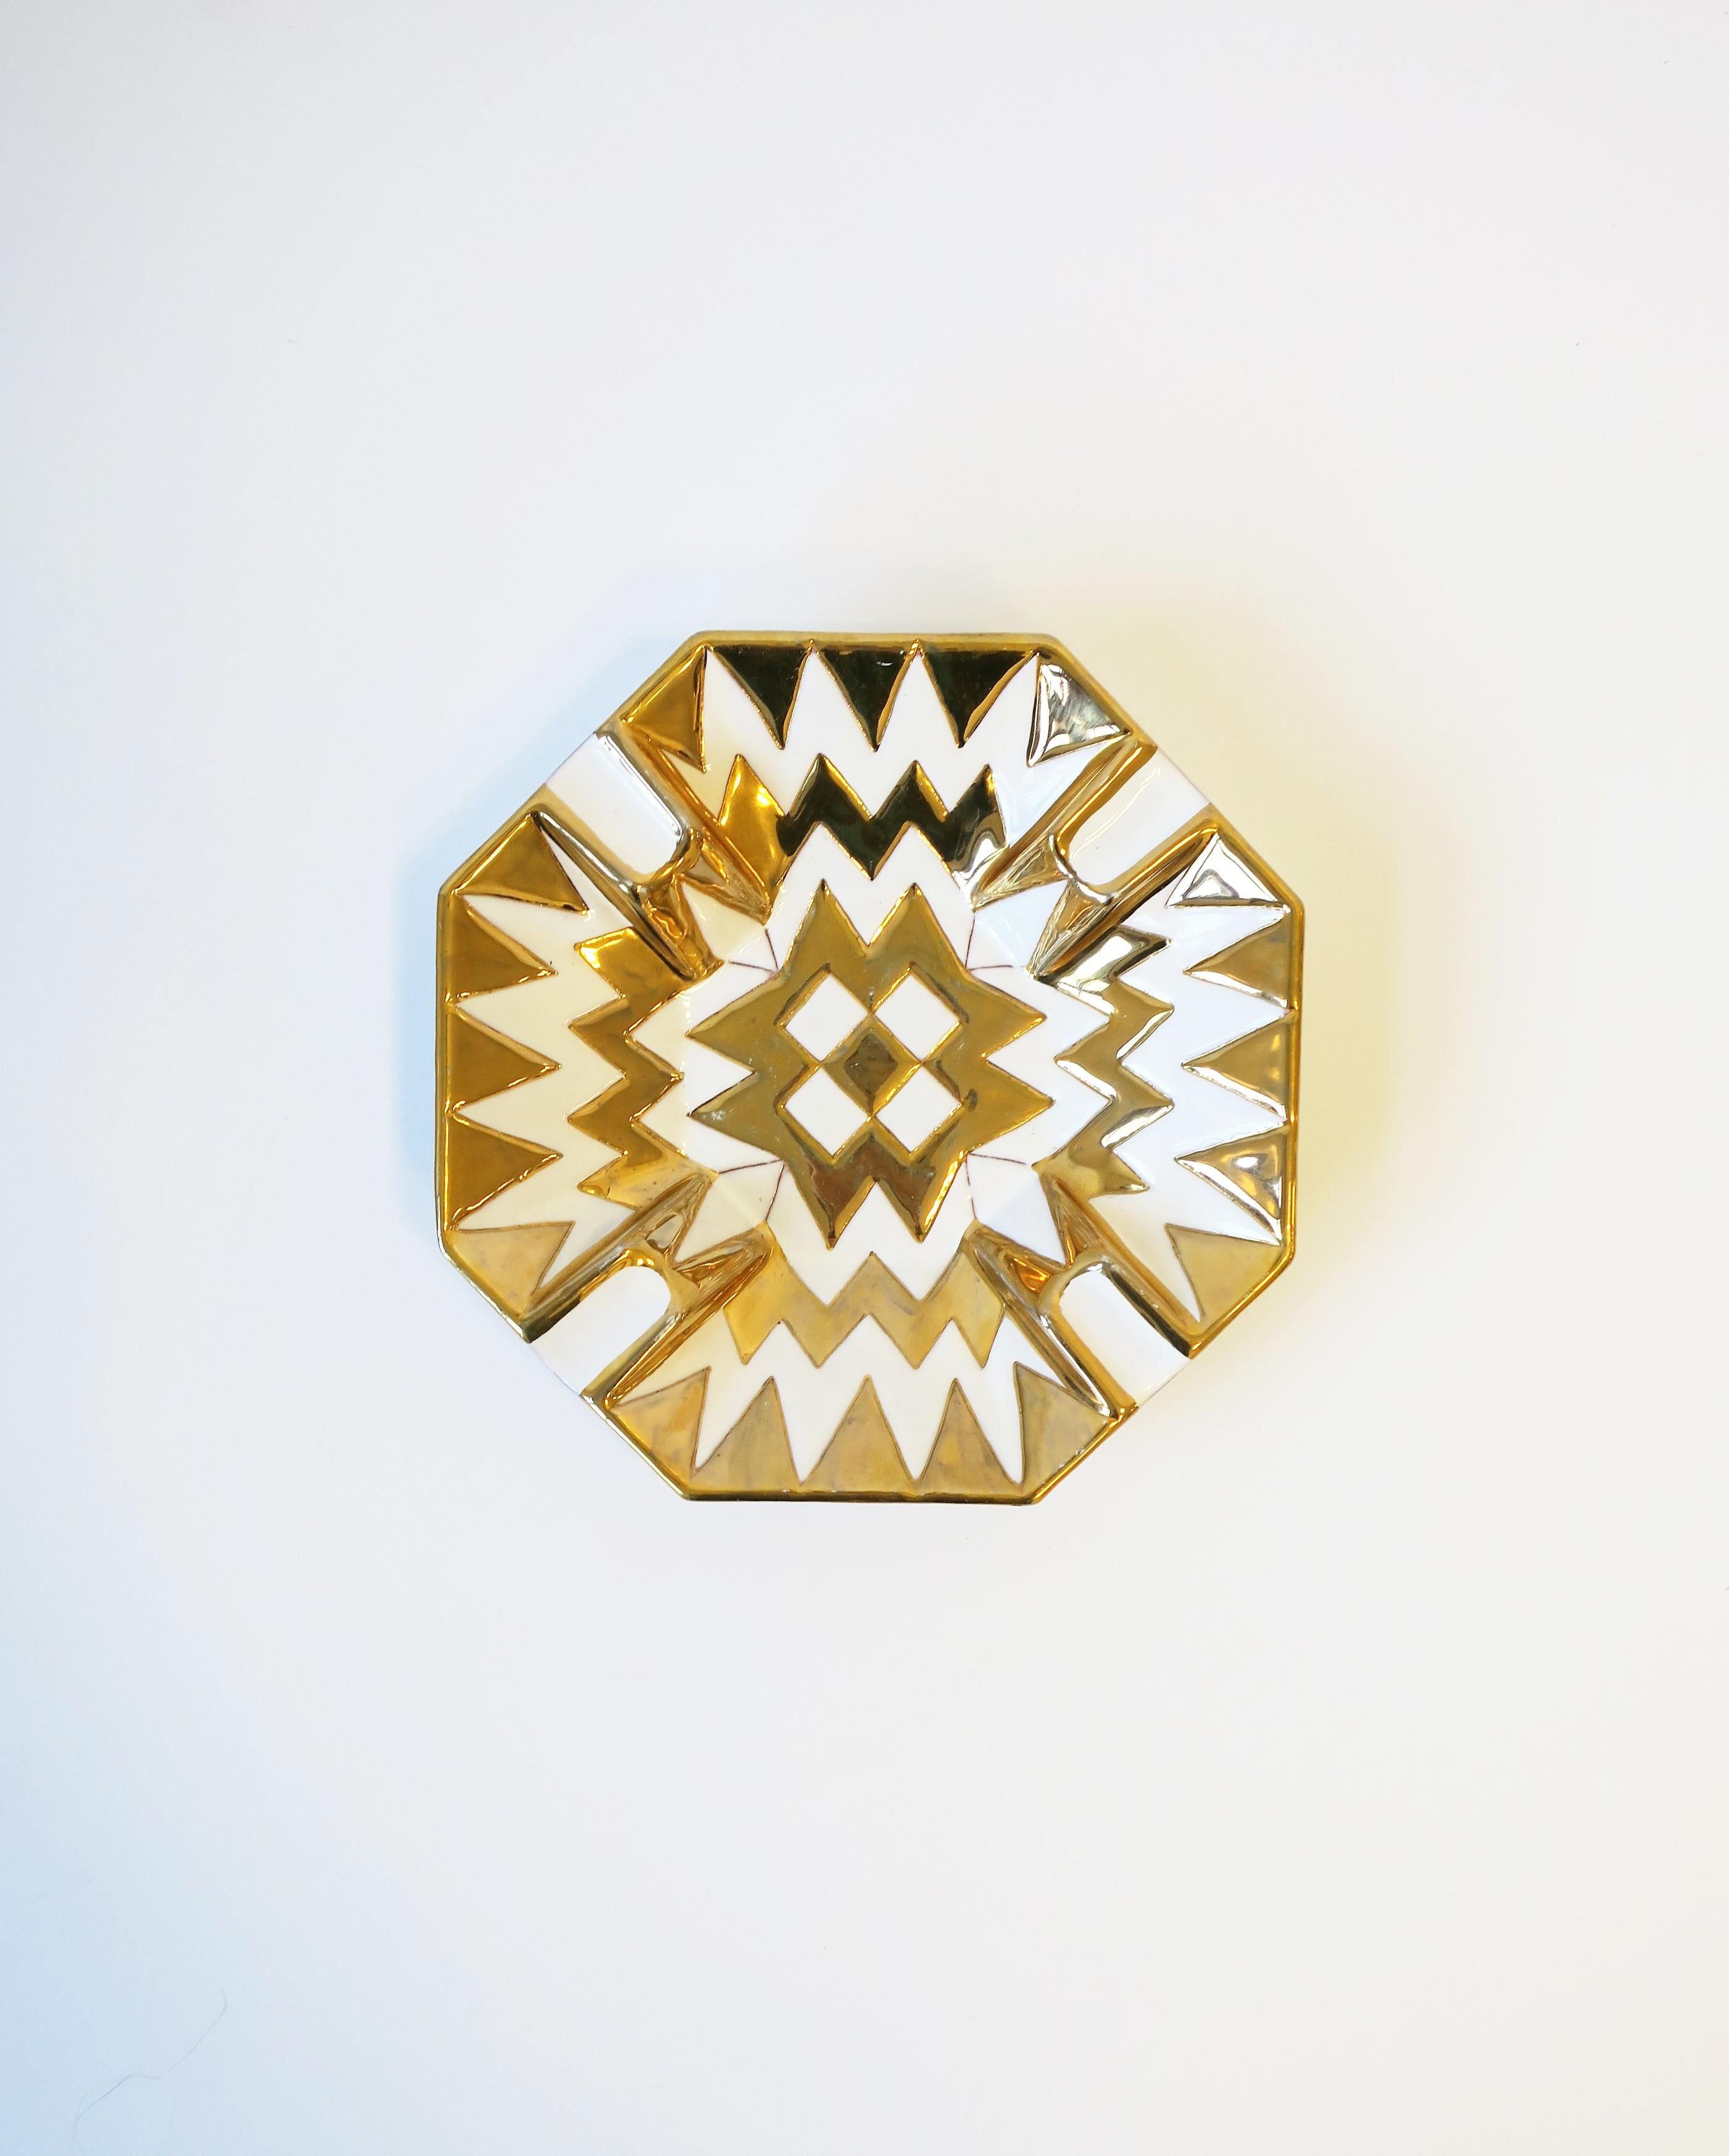 An Italian octagonal white and gold ceramic catchall vide-poche or ashtray, circa late-20th century, Italy. Great as a vide-poche catchall (shown holding jewelry), and as an ashtray with four support indents. Piece appears to have never been used.